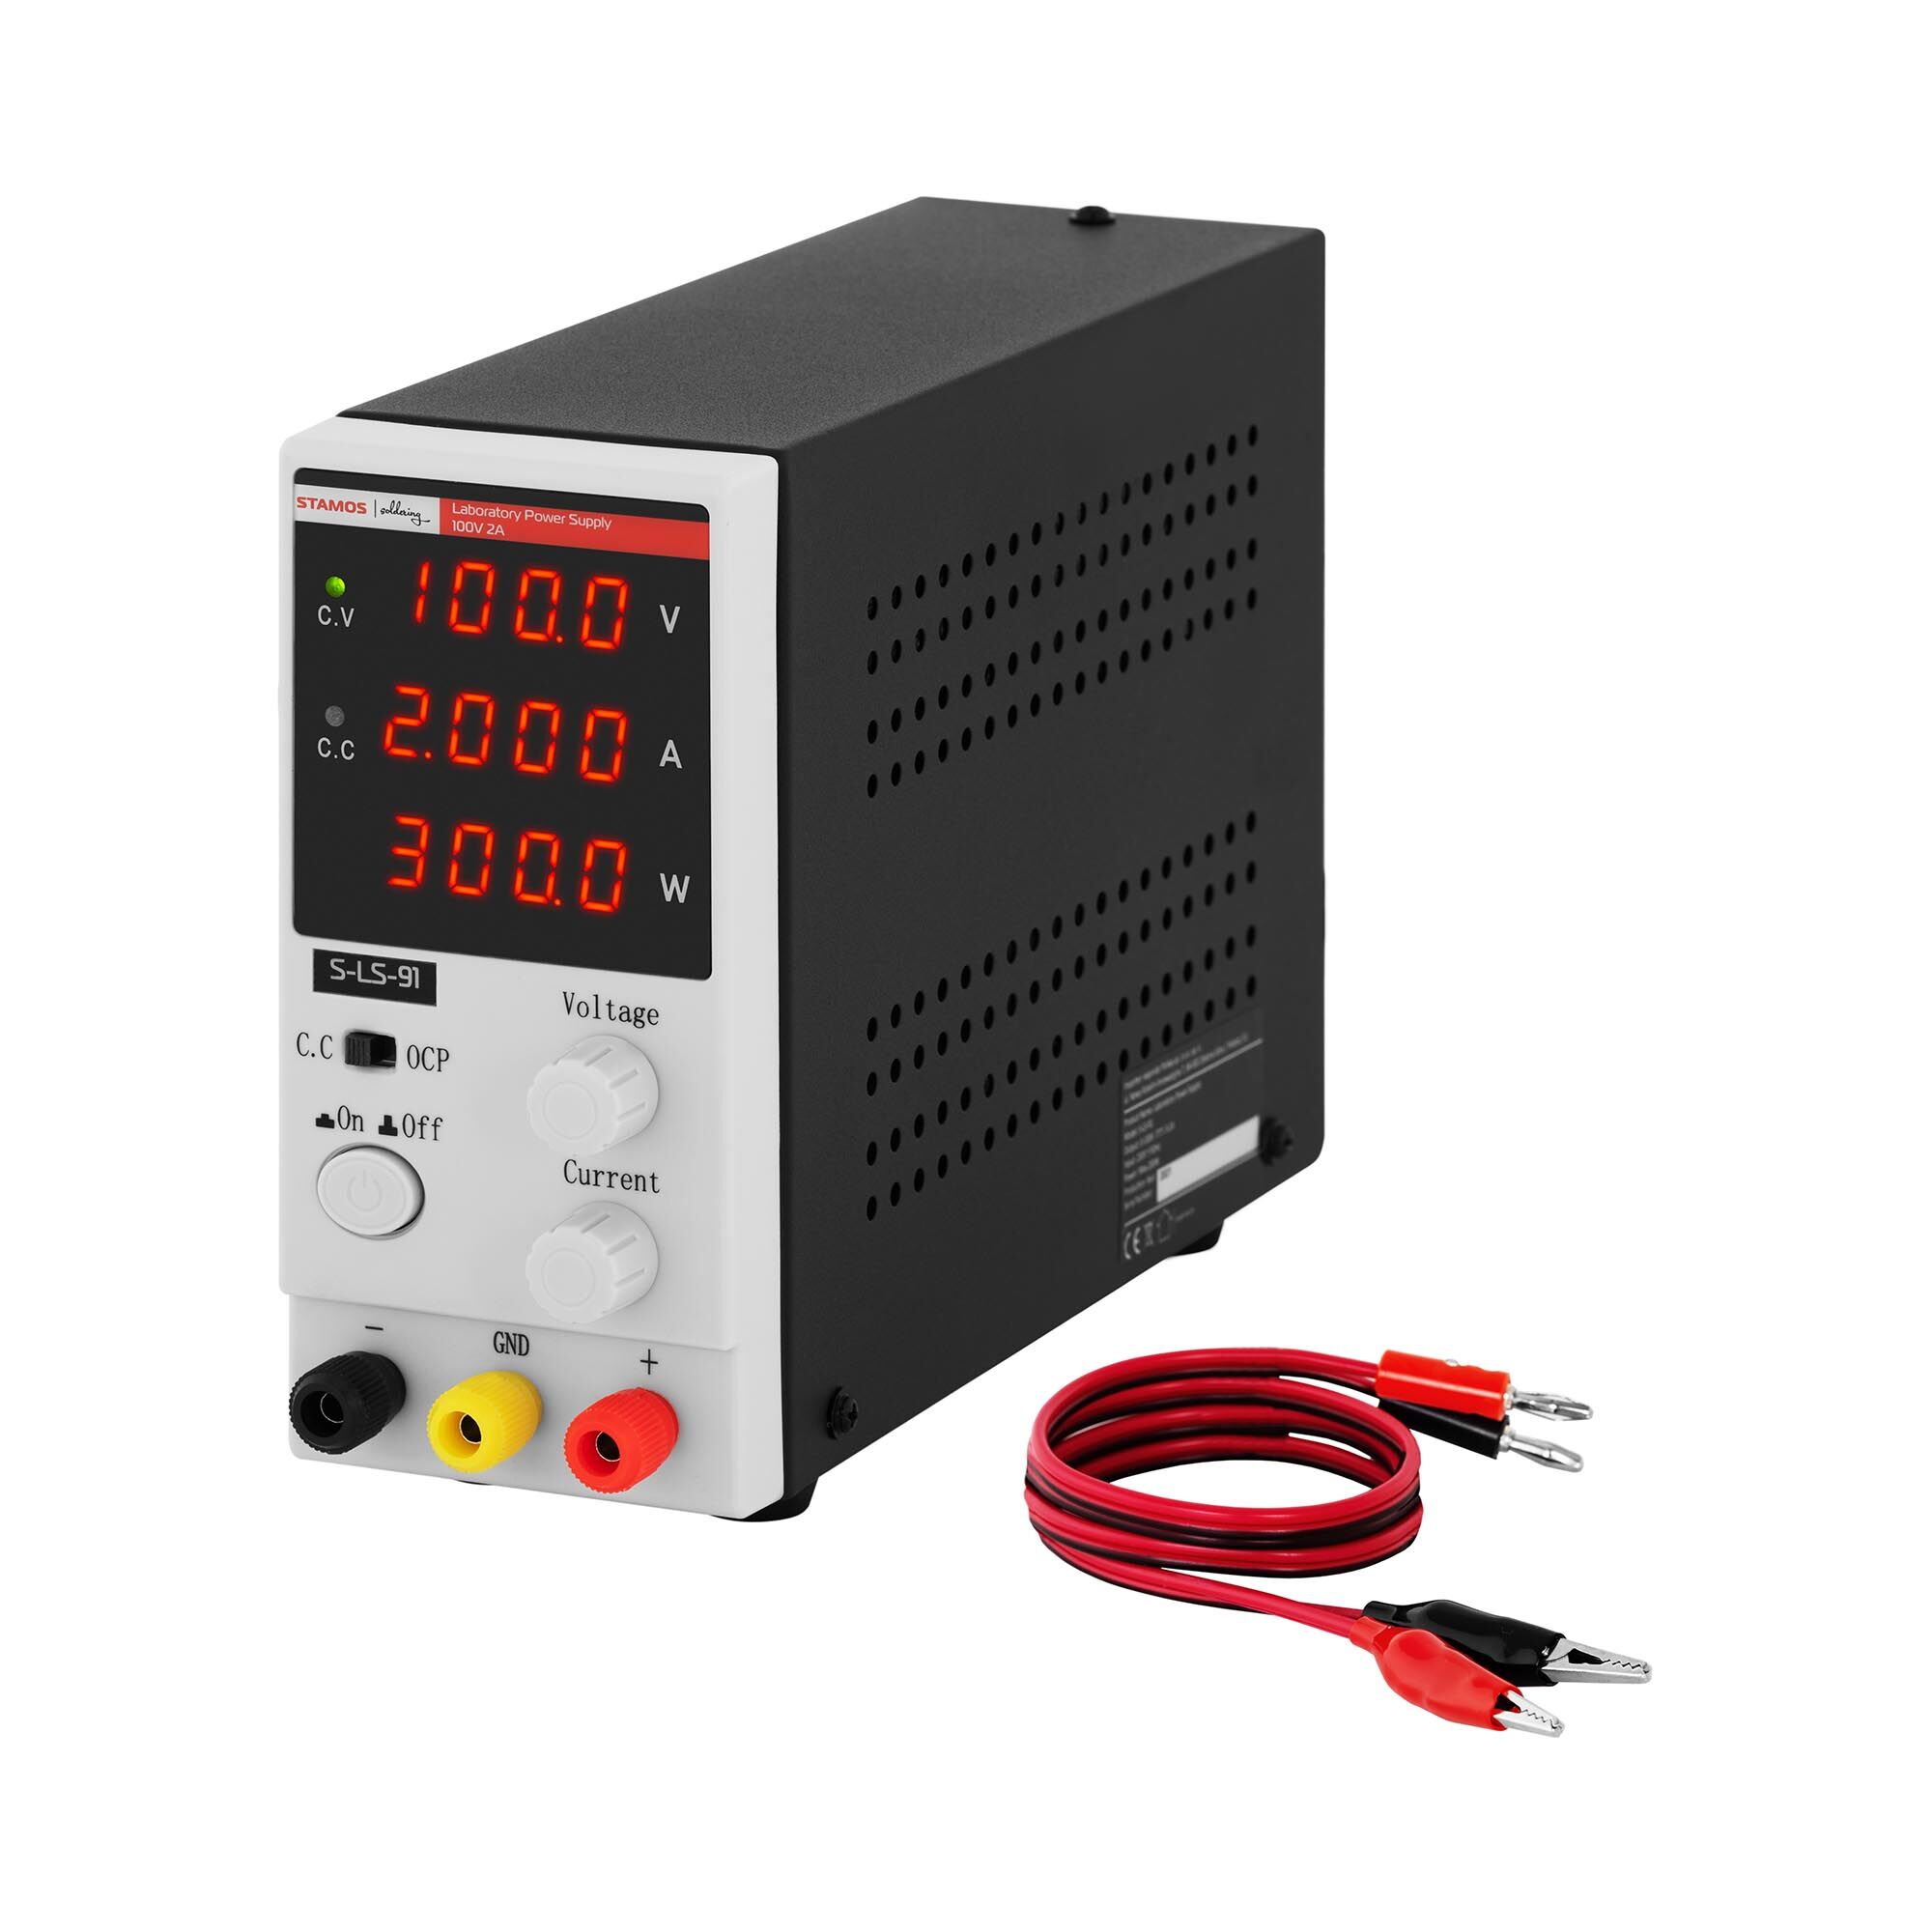 Stamos Soldering Bench Power Supply - 0 - 100 V - 0 - 2 A DC - 200 W - 4-digit LED display